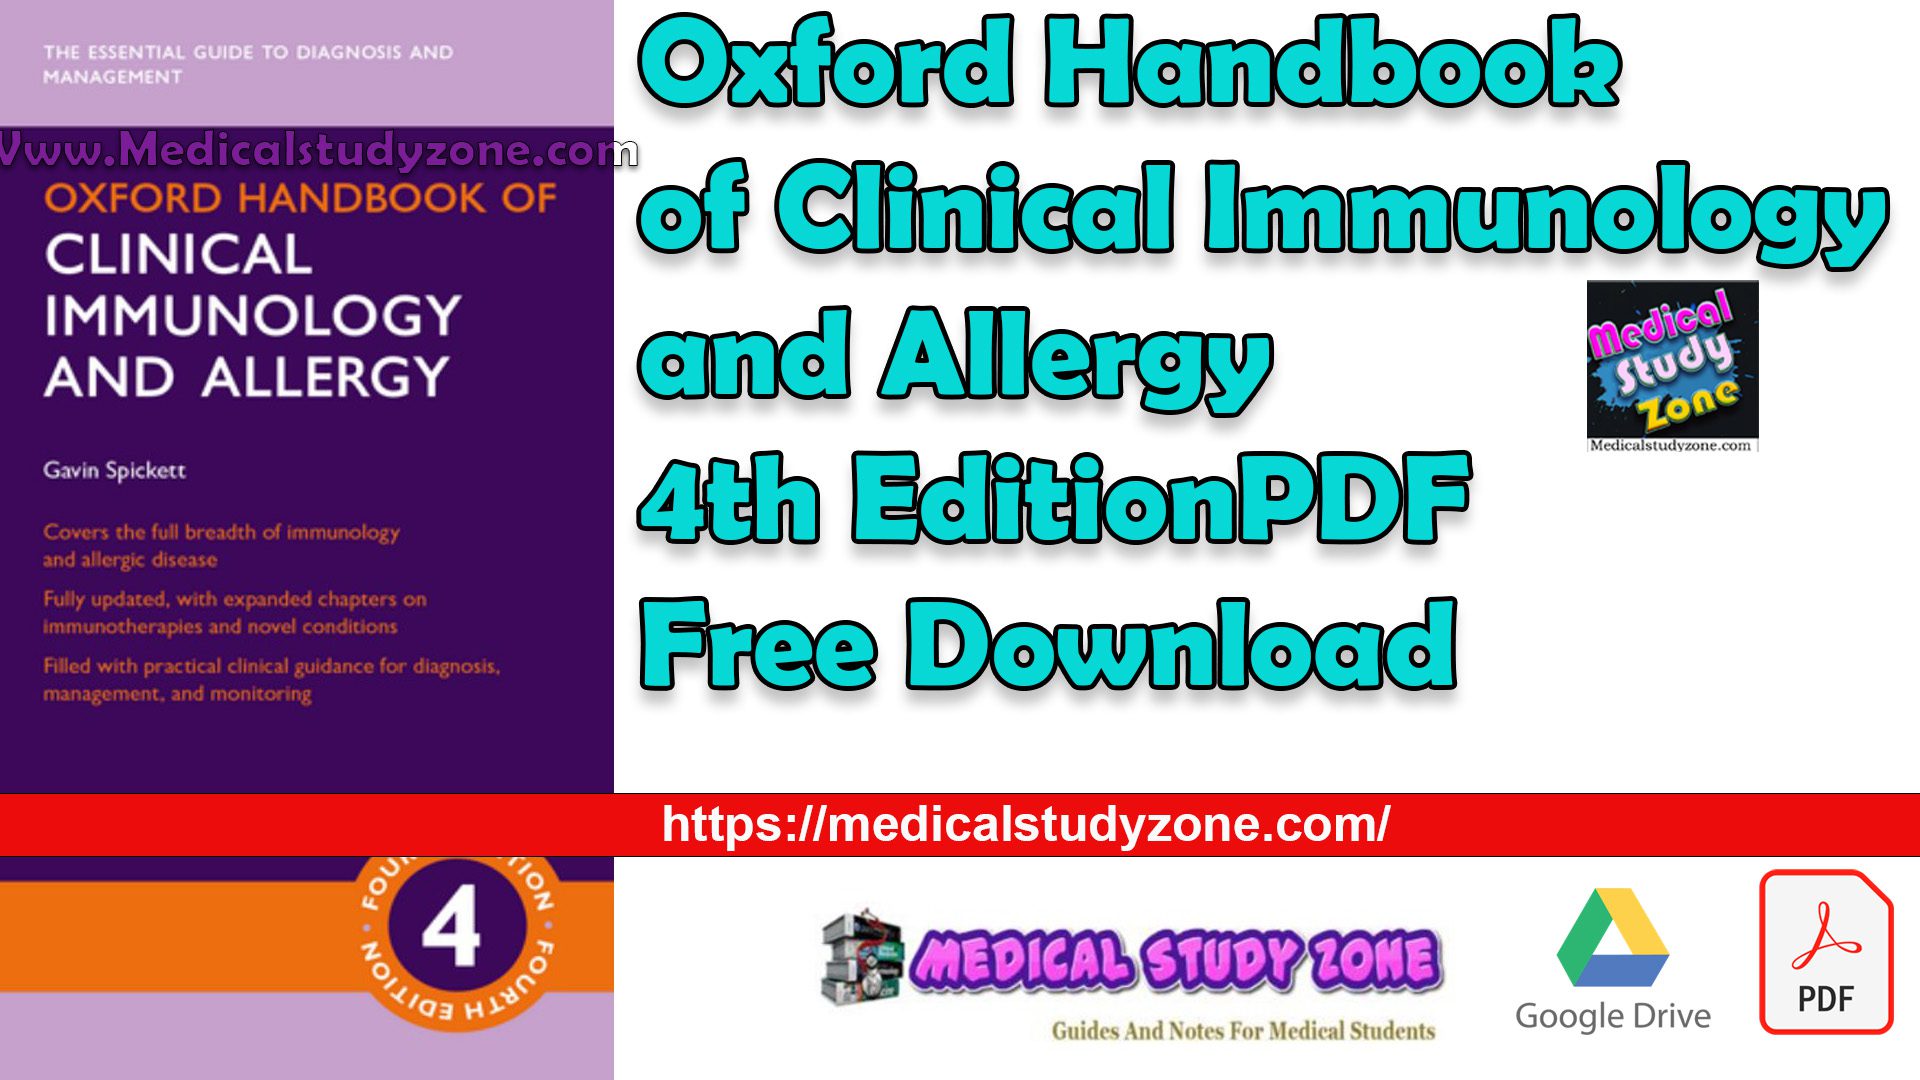 Oxford Handbook of Clinical Immunology and Allergy 4th Edition PDF Free Download